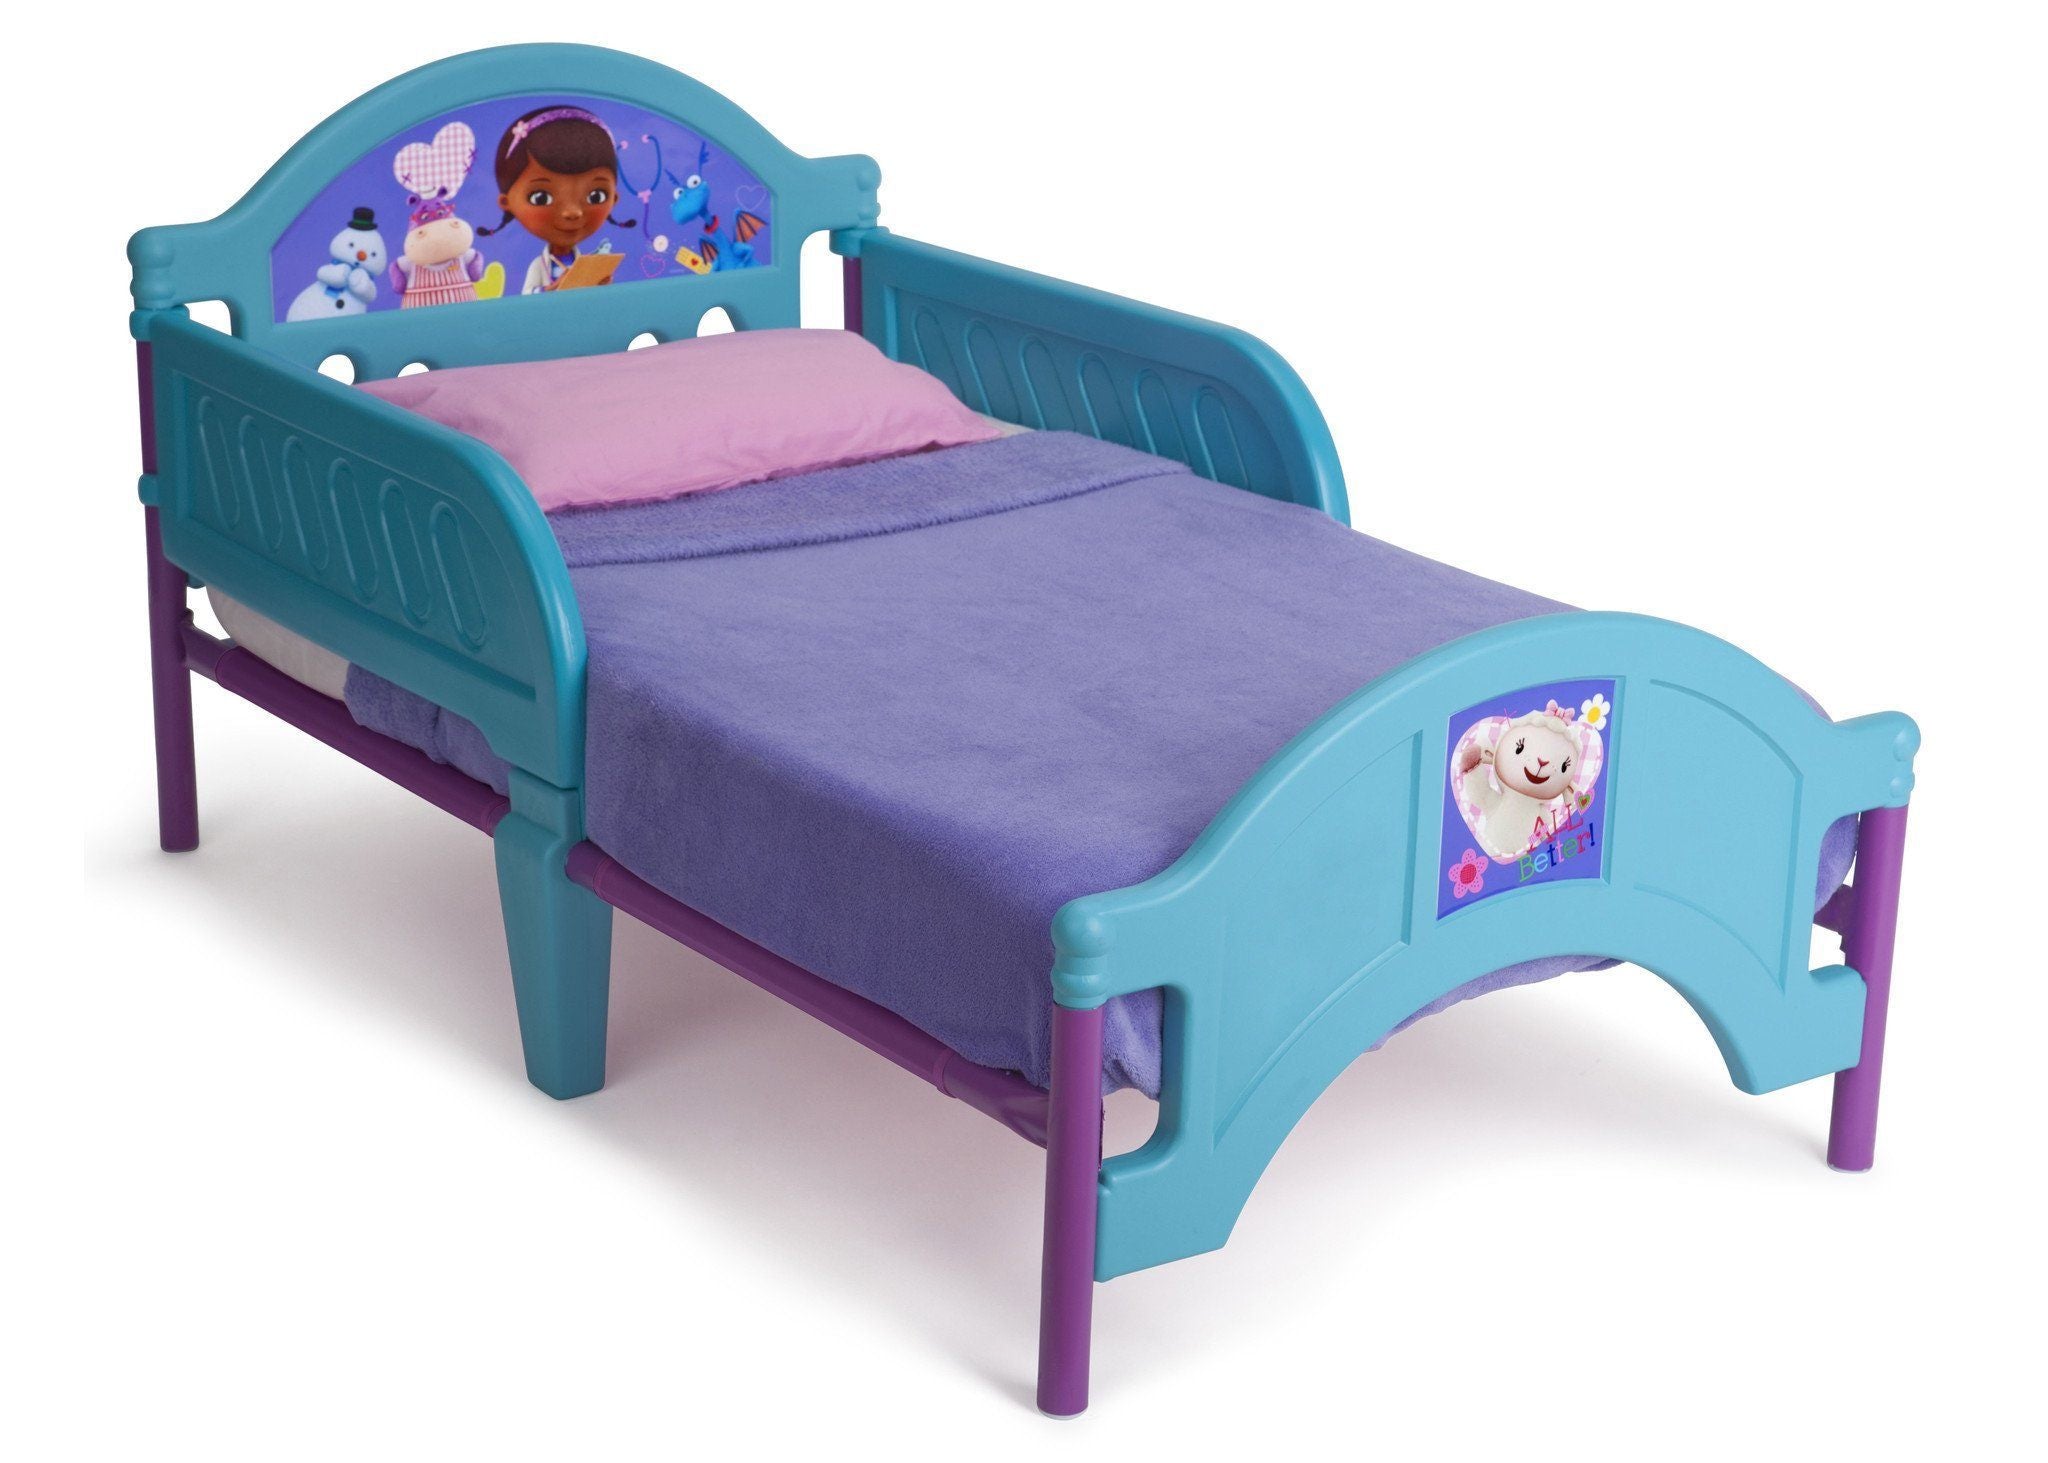 doc baby bed